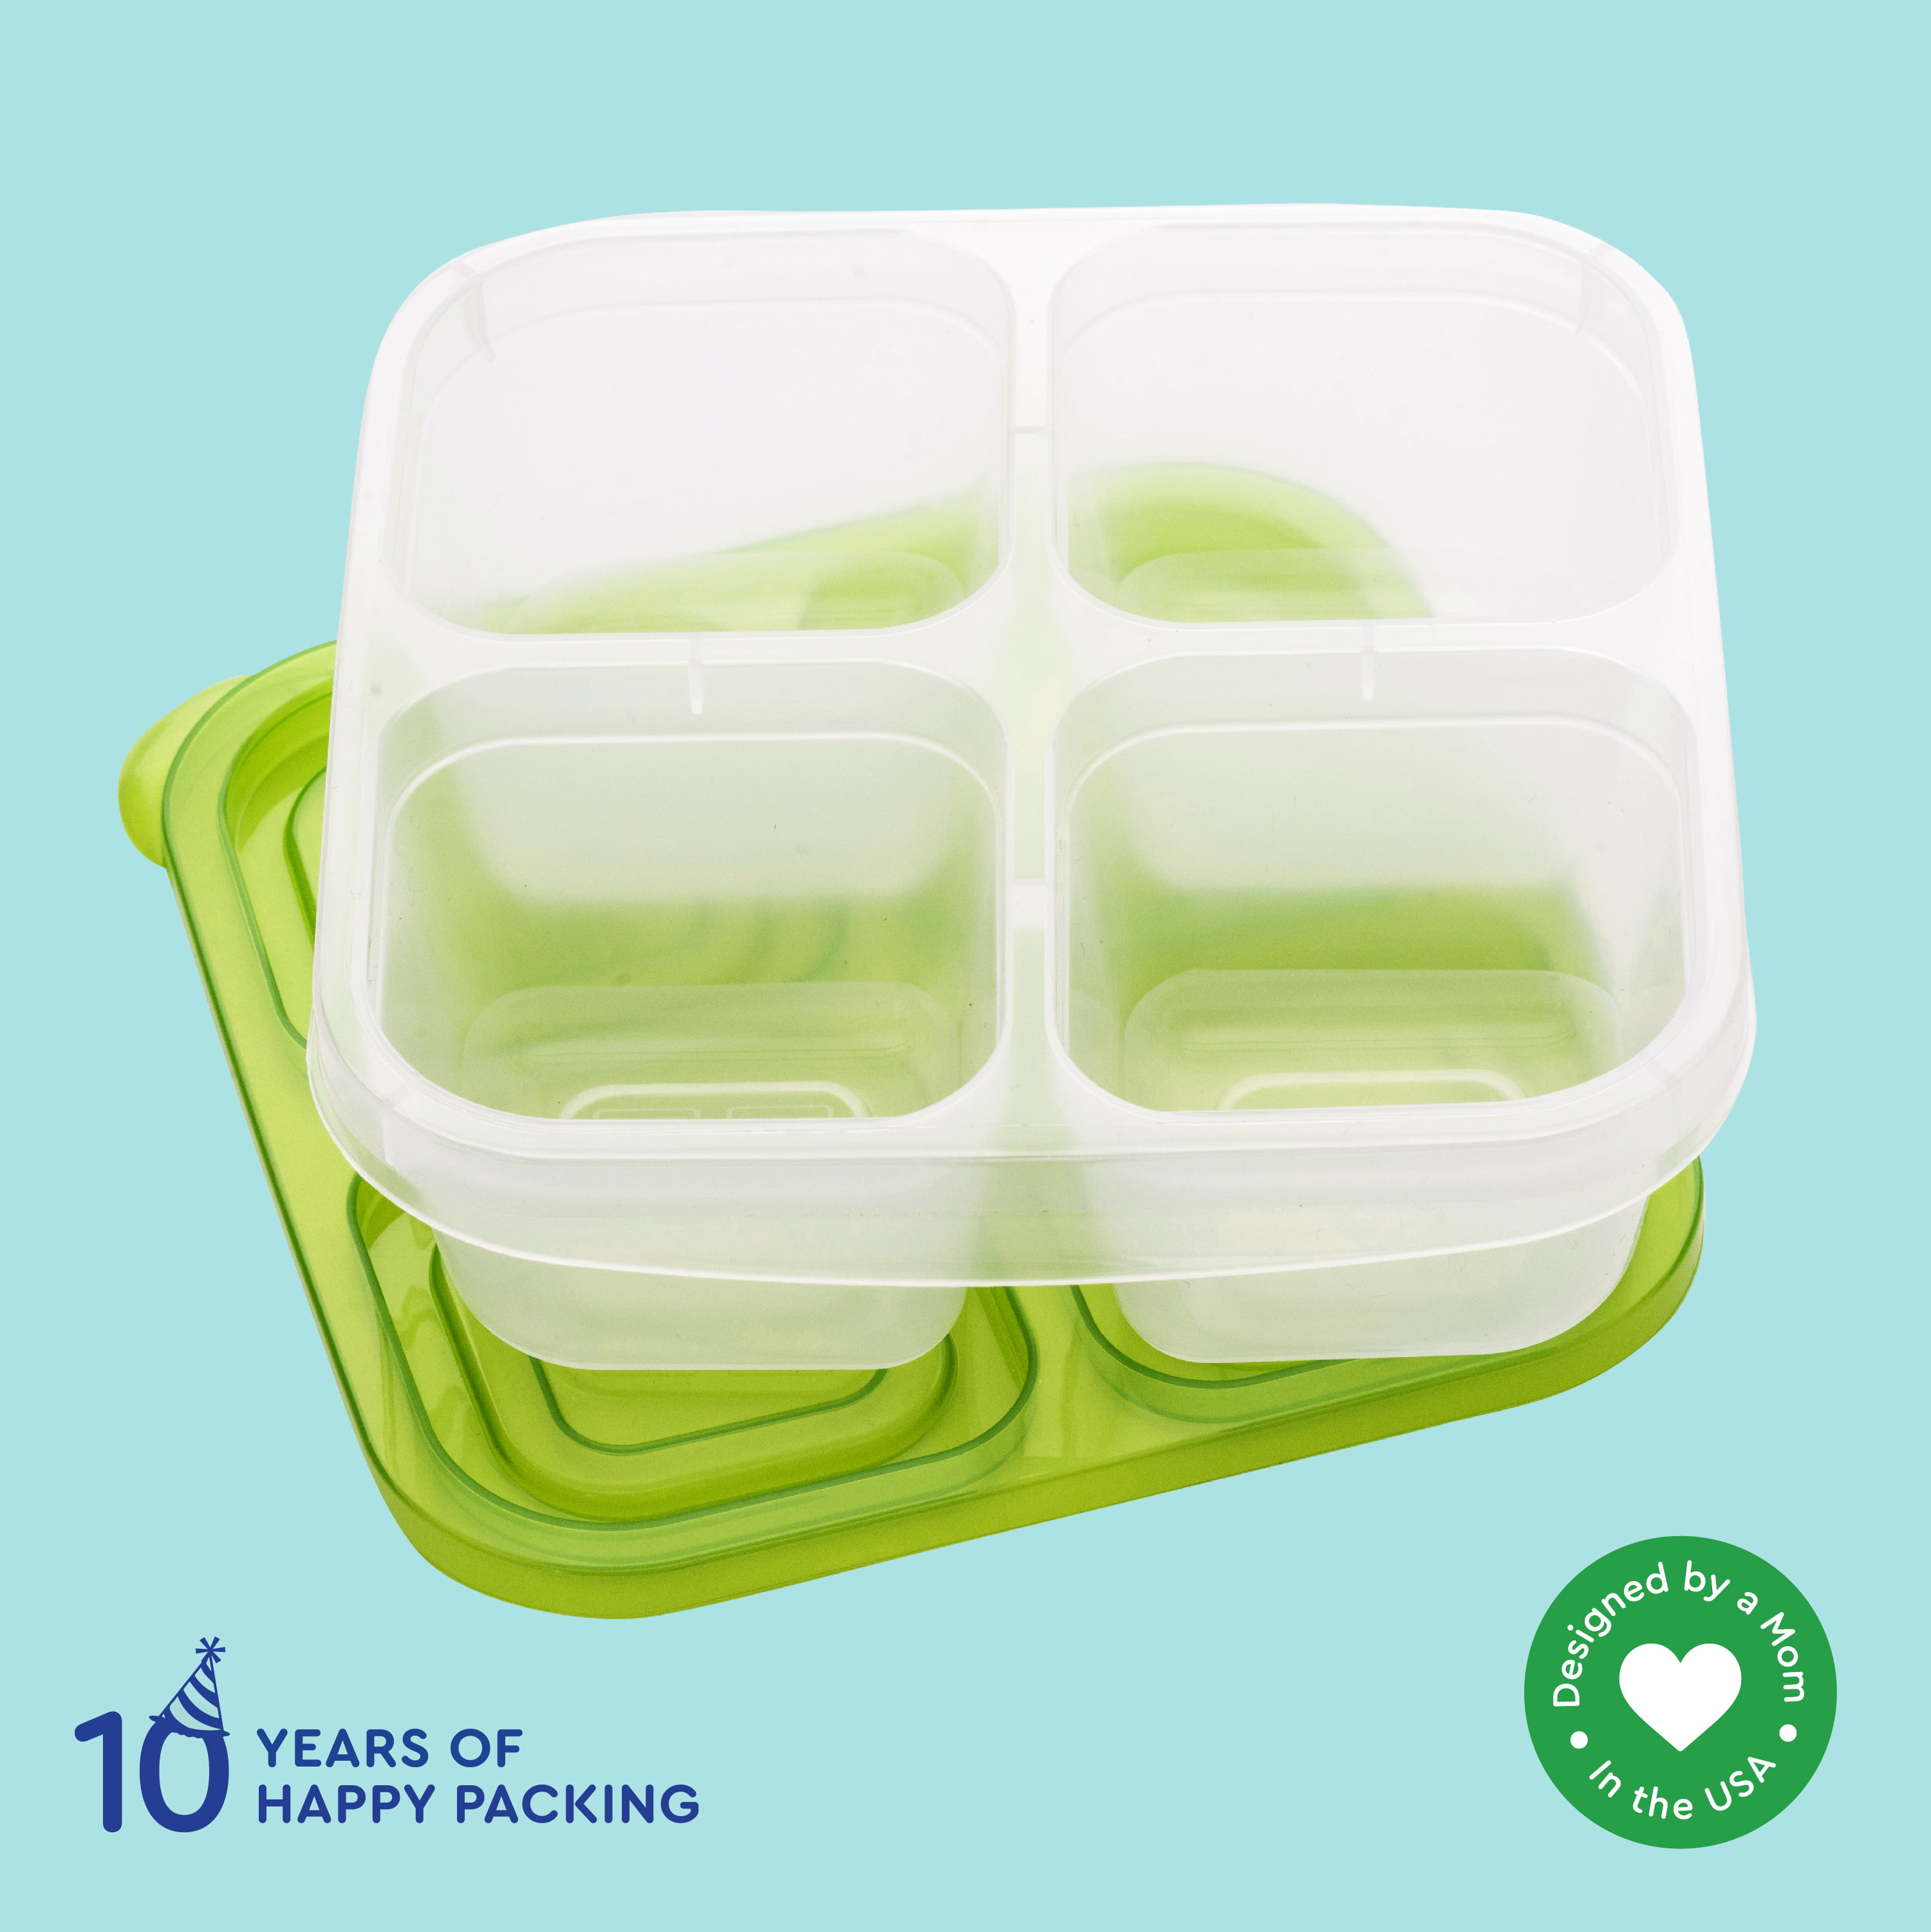 WHSNDL 4-Compartment Bento Snack Boxes Reusable Meal Prep Containers  BPA-Free Food Containers for Ki…See more WHSNDL 4-Compartment Bento Snack  Boxes